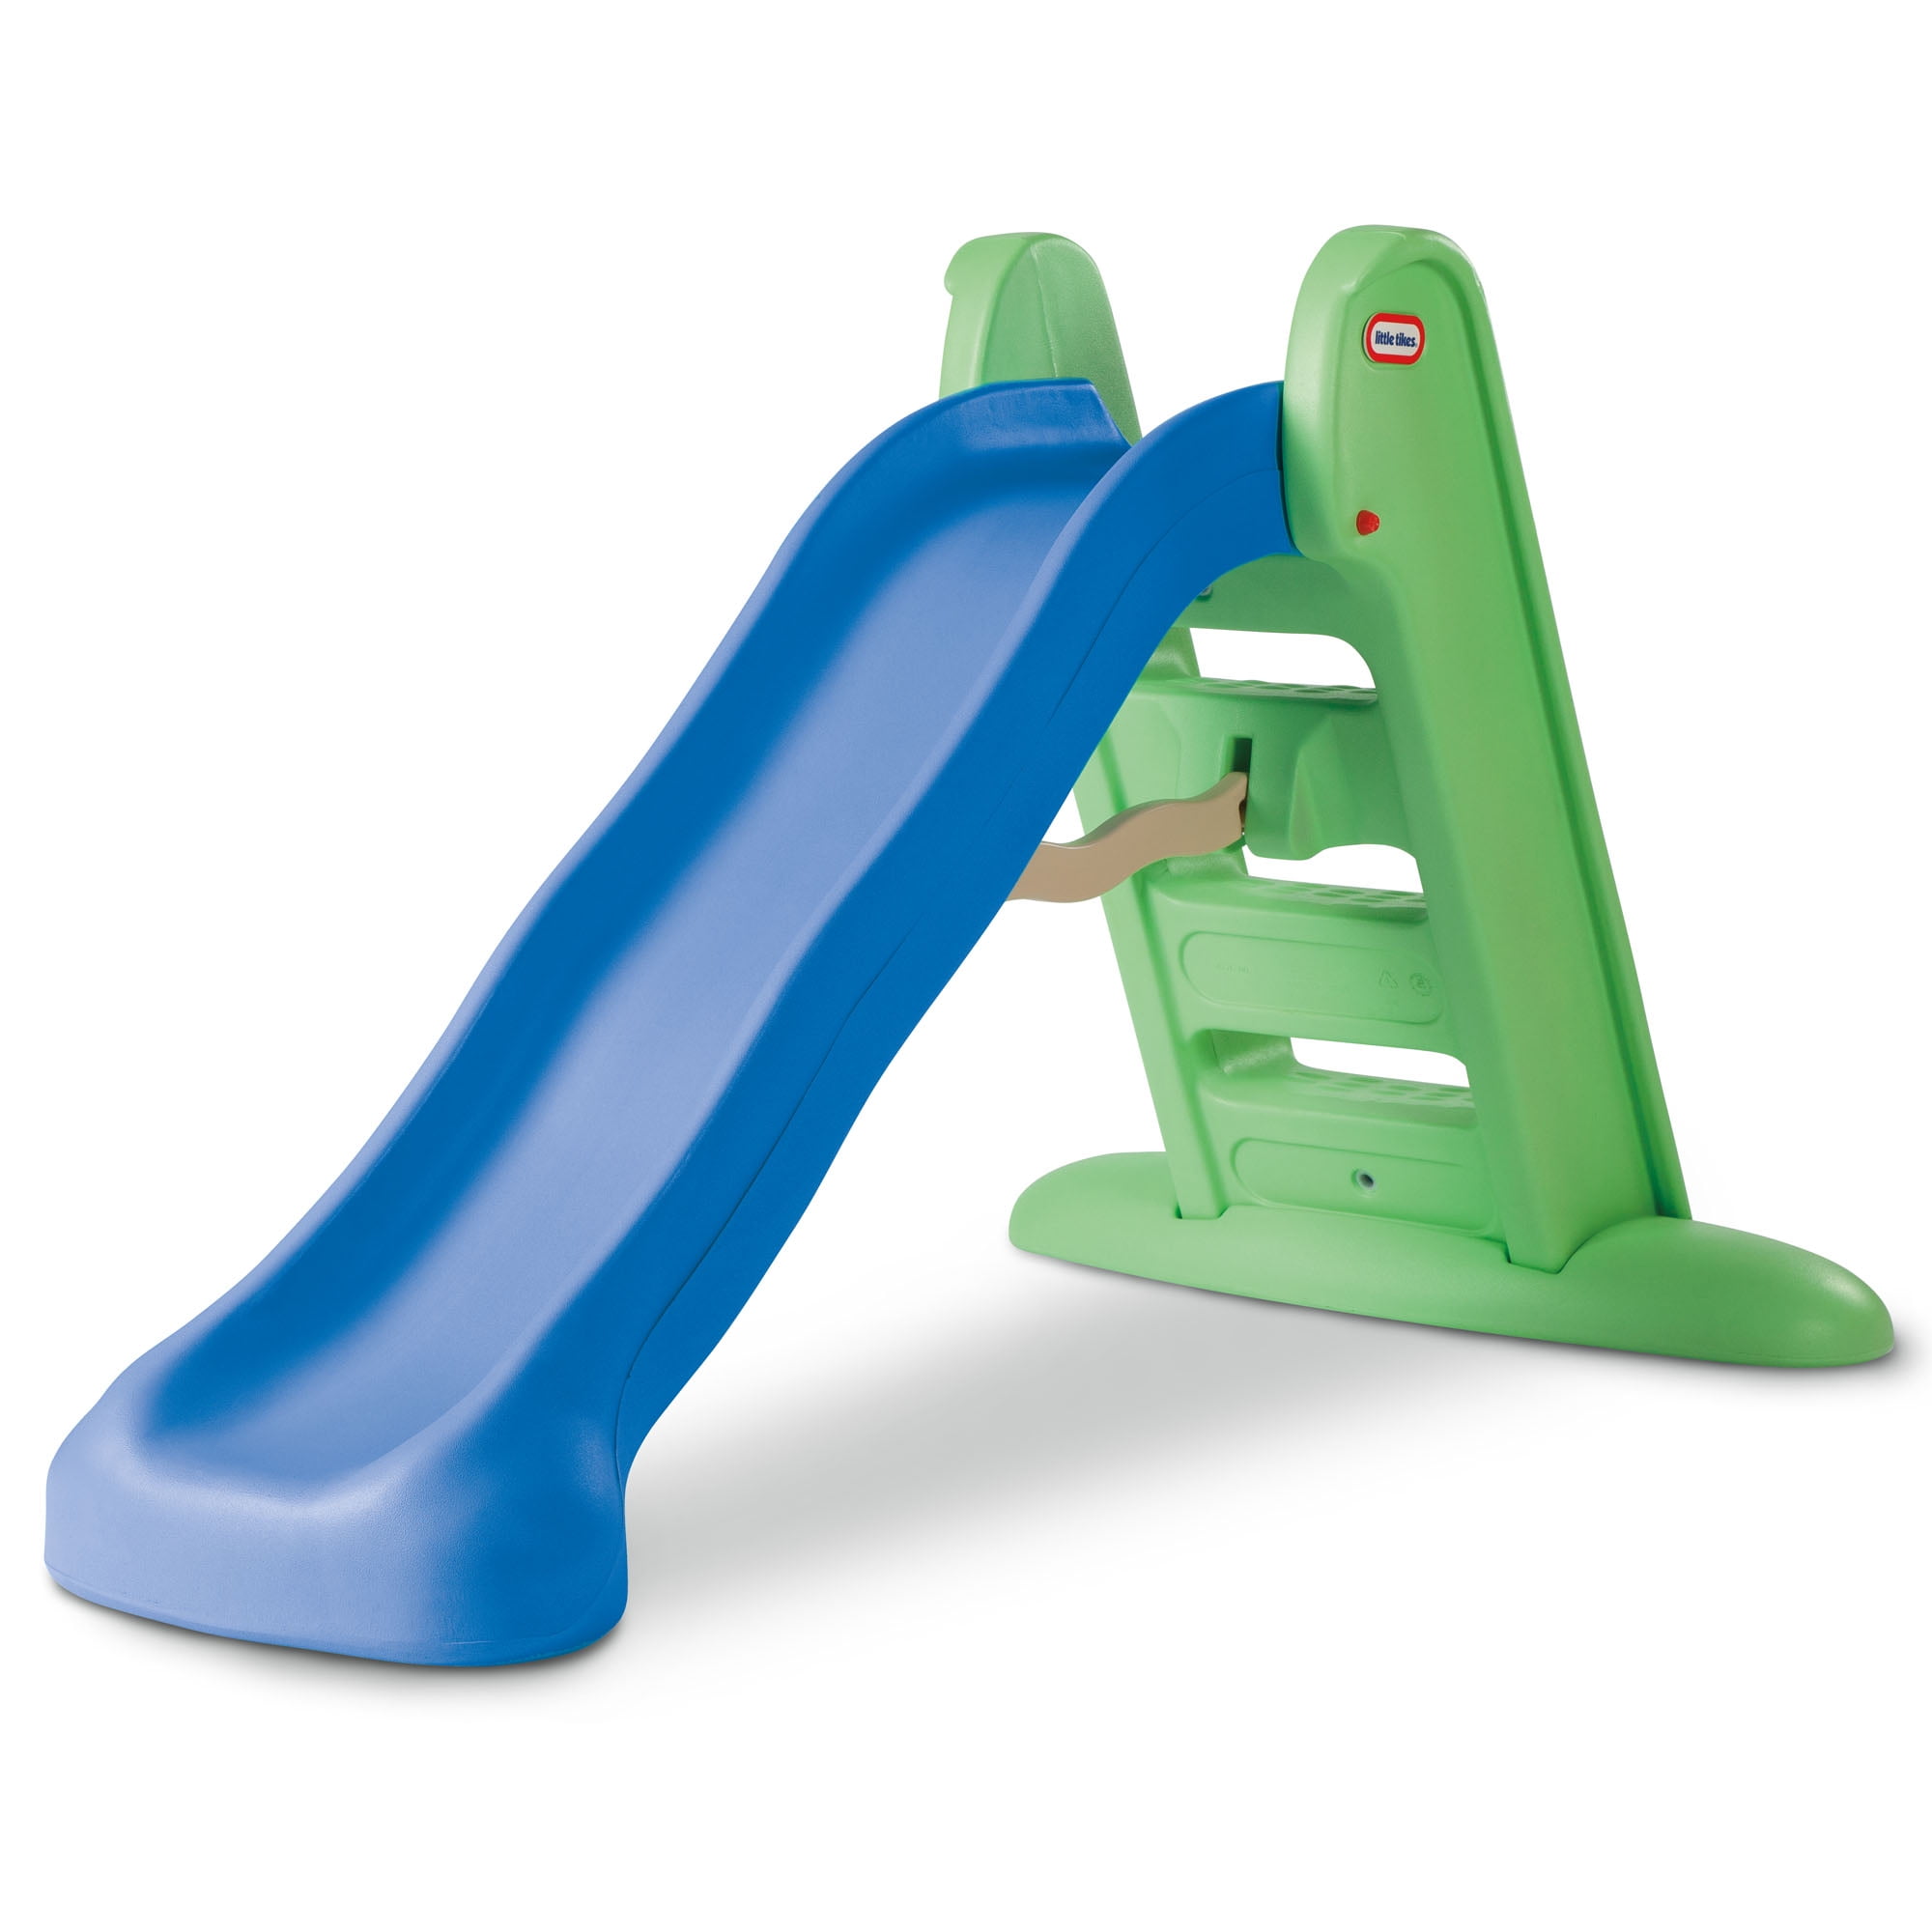 Little Tikes Easy Store Large Playground Slide with Folding for Easy Storage, Outdoor Indoor Active Play, Blue and Green- For Kids Toddlers Boys Girls Ages 2 to 6 Year old - 1